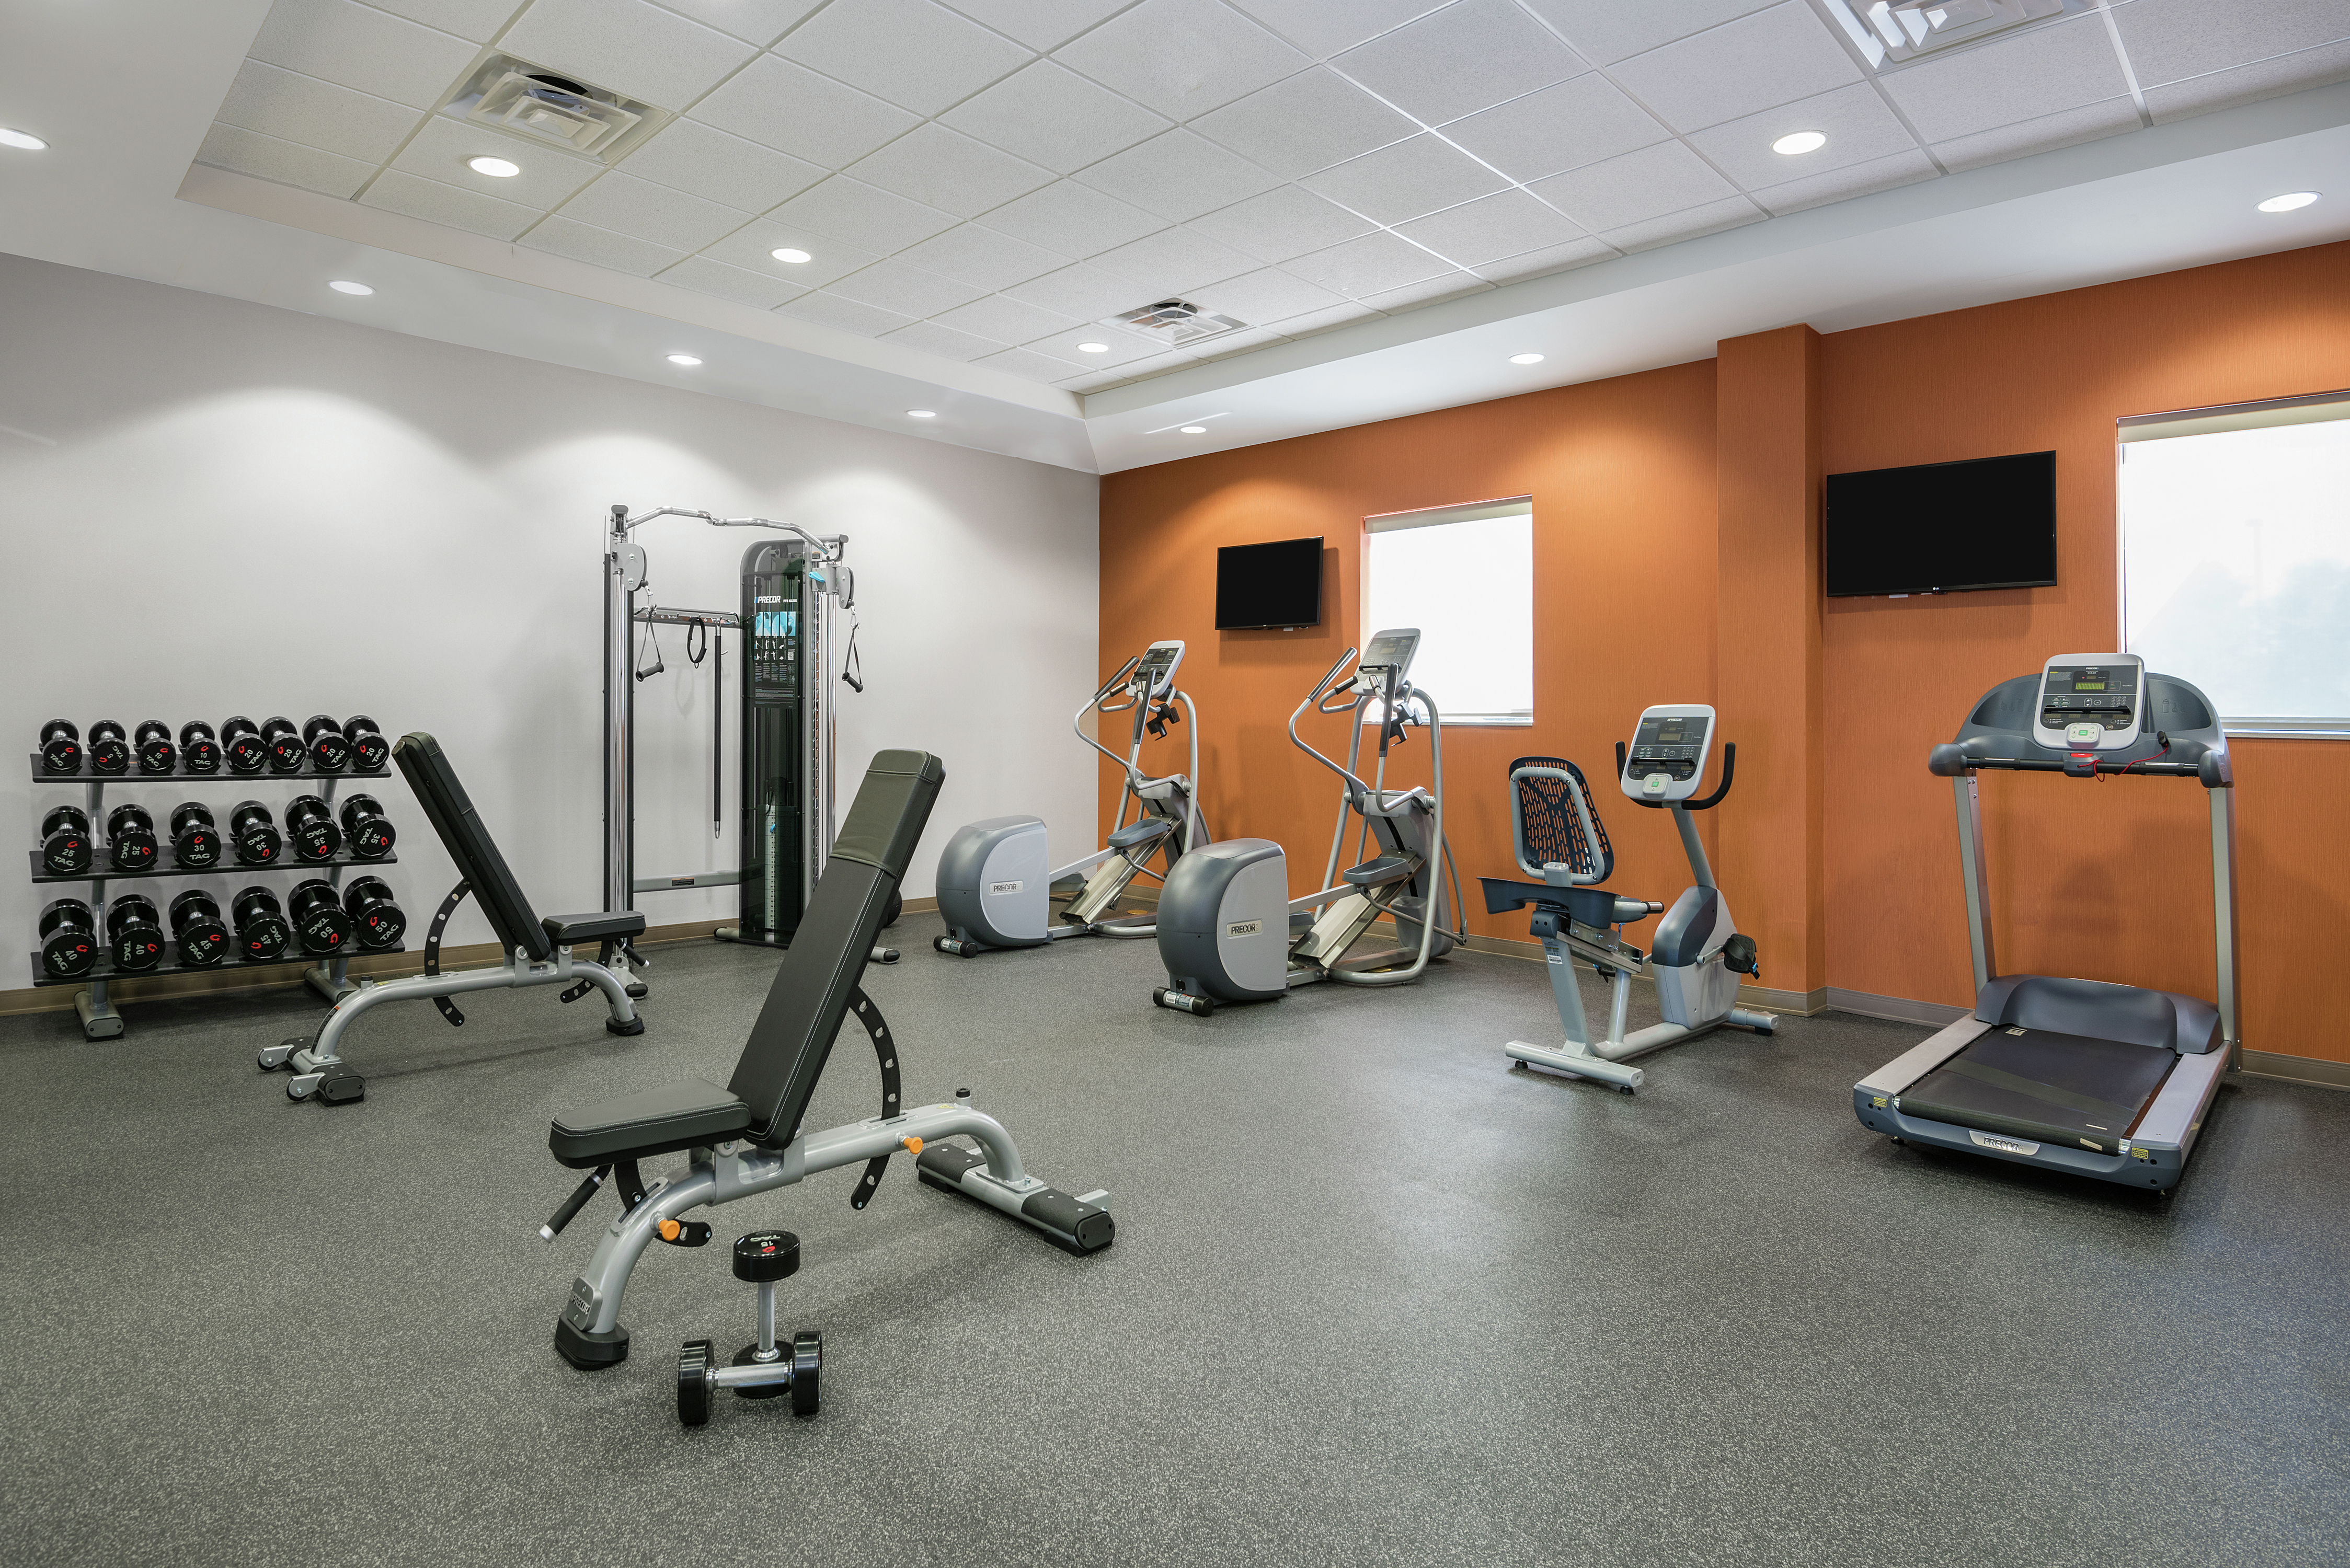 Fitness Center With Cardio Equipment, TVs, Windows, Weight Benches, Free Weights, and Weight Machines in Spin2Cycle Fitness Area